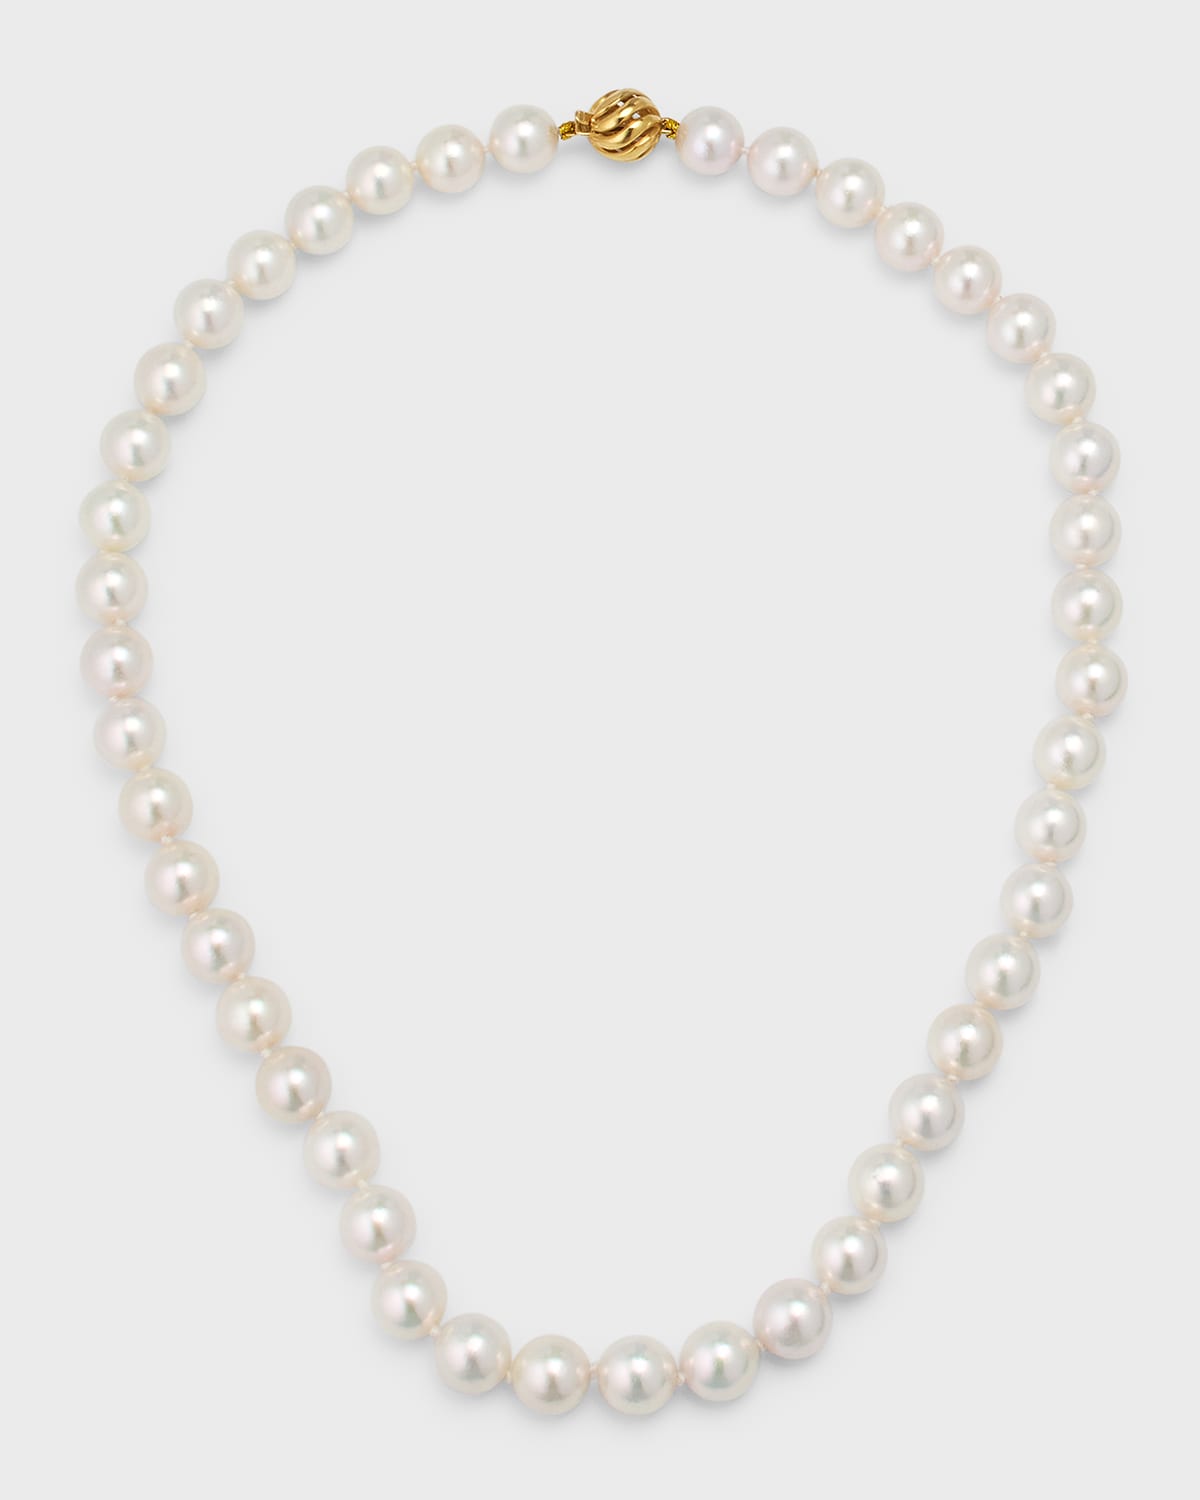 18K Yellow Gold Akoya Cultured Pearl Necklace